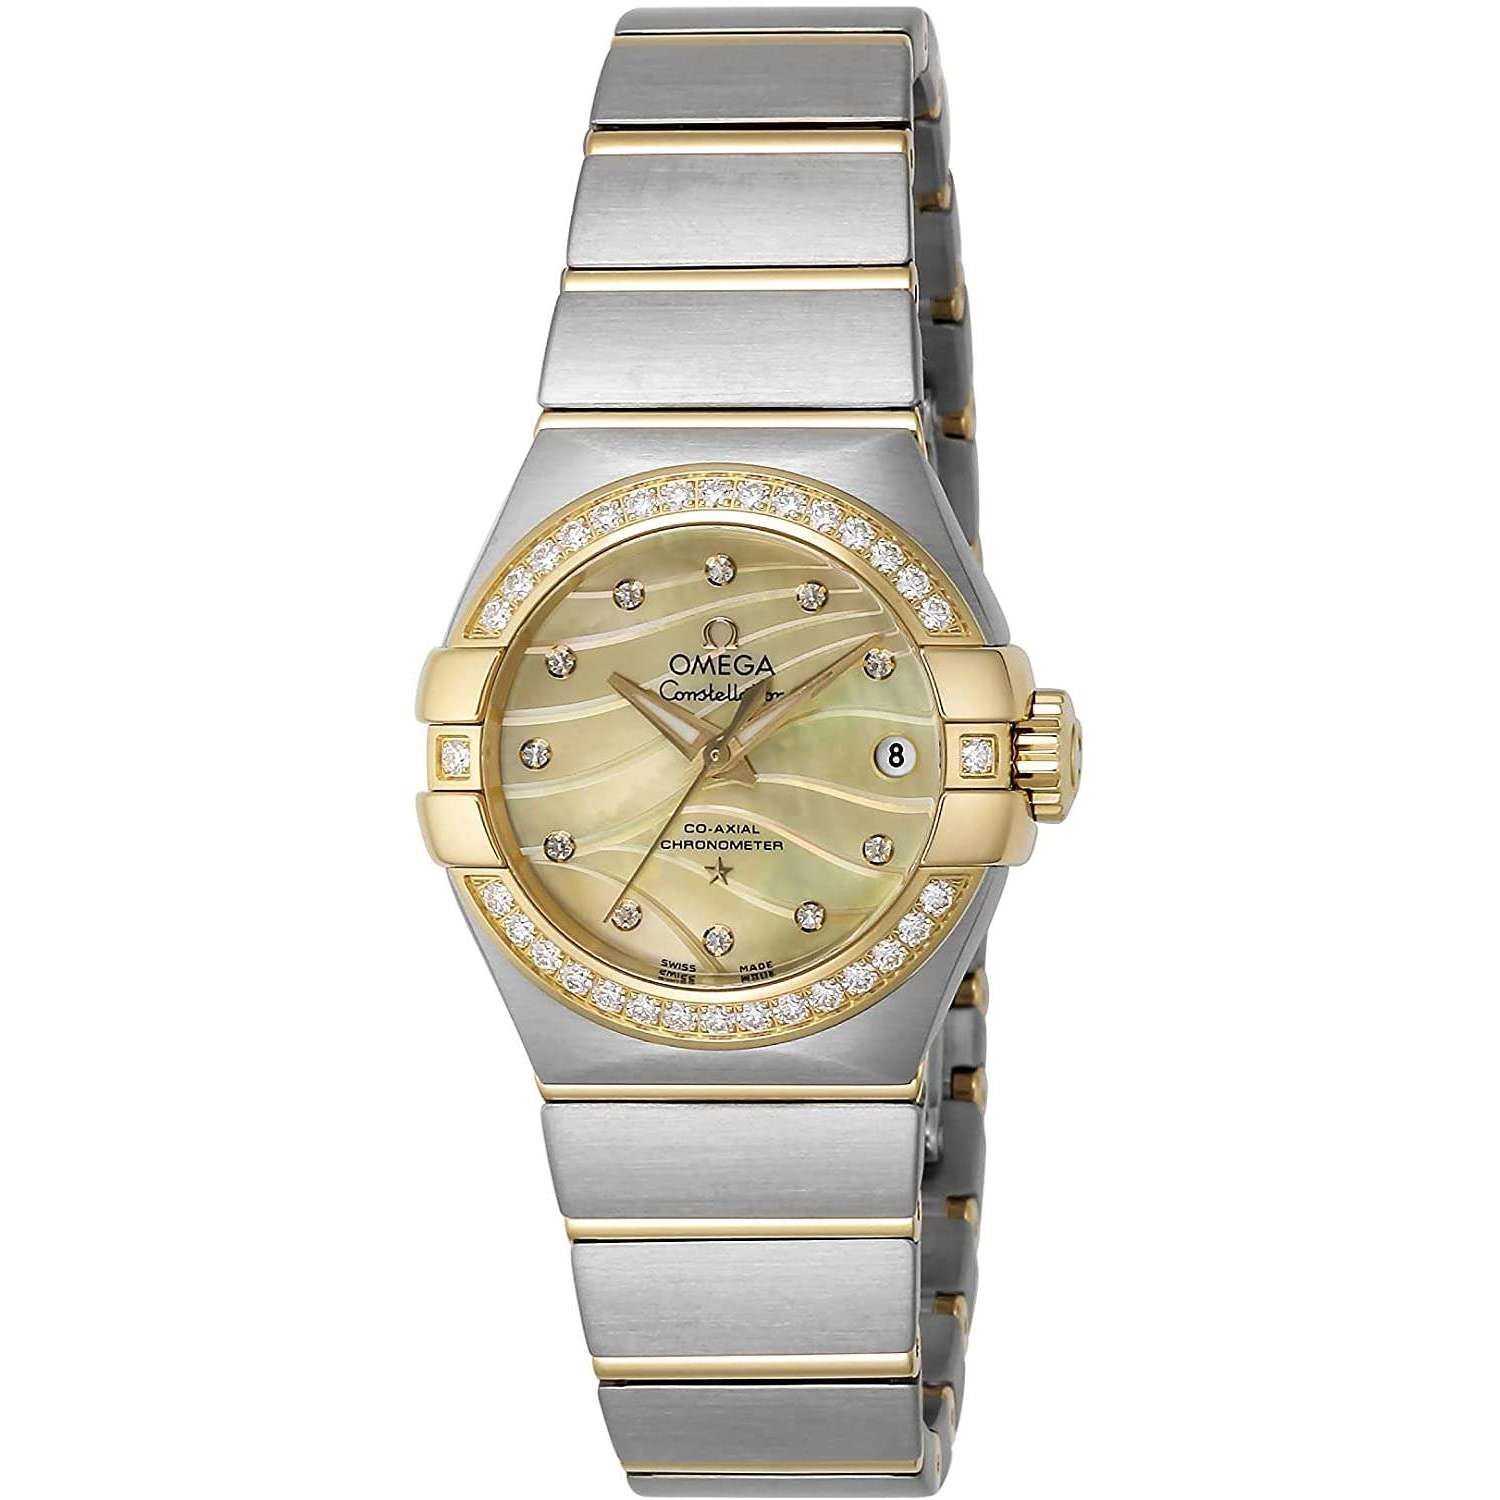 ROOK JAPAN:OMEGA CONSTELLATION CO-AXIAL CHRONOMETER 27 MM WOMEN WATCH 123.25.27.20.57.002,Luxury Watch,Omega